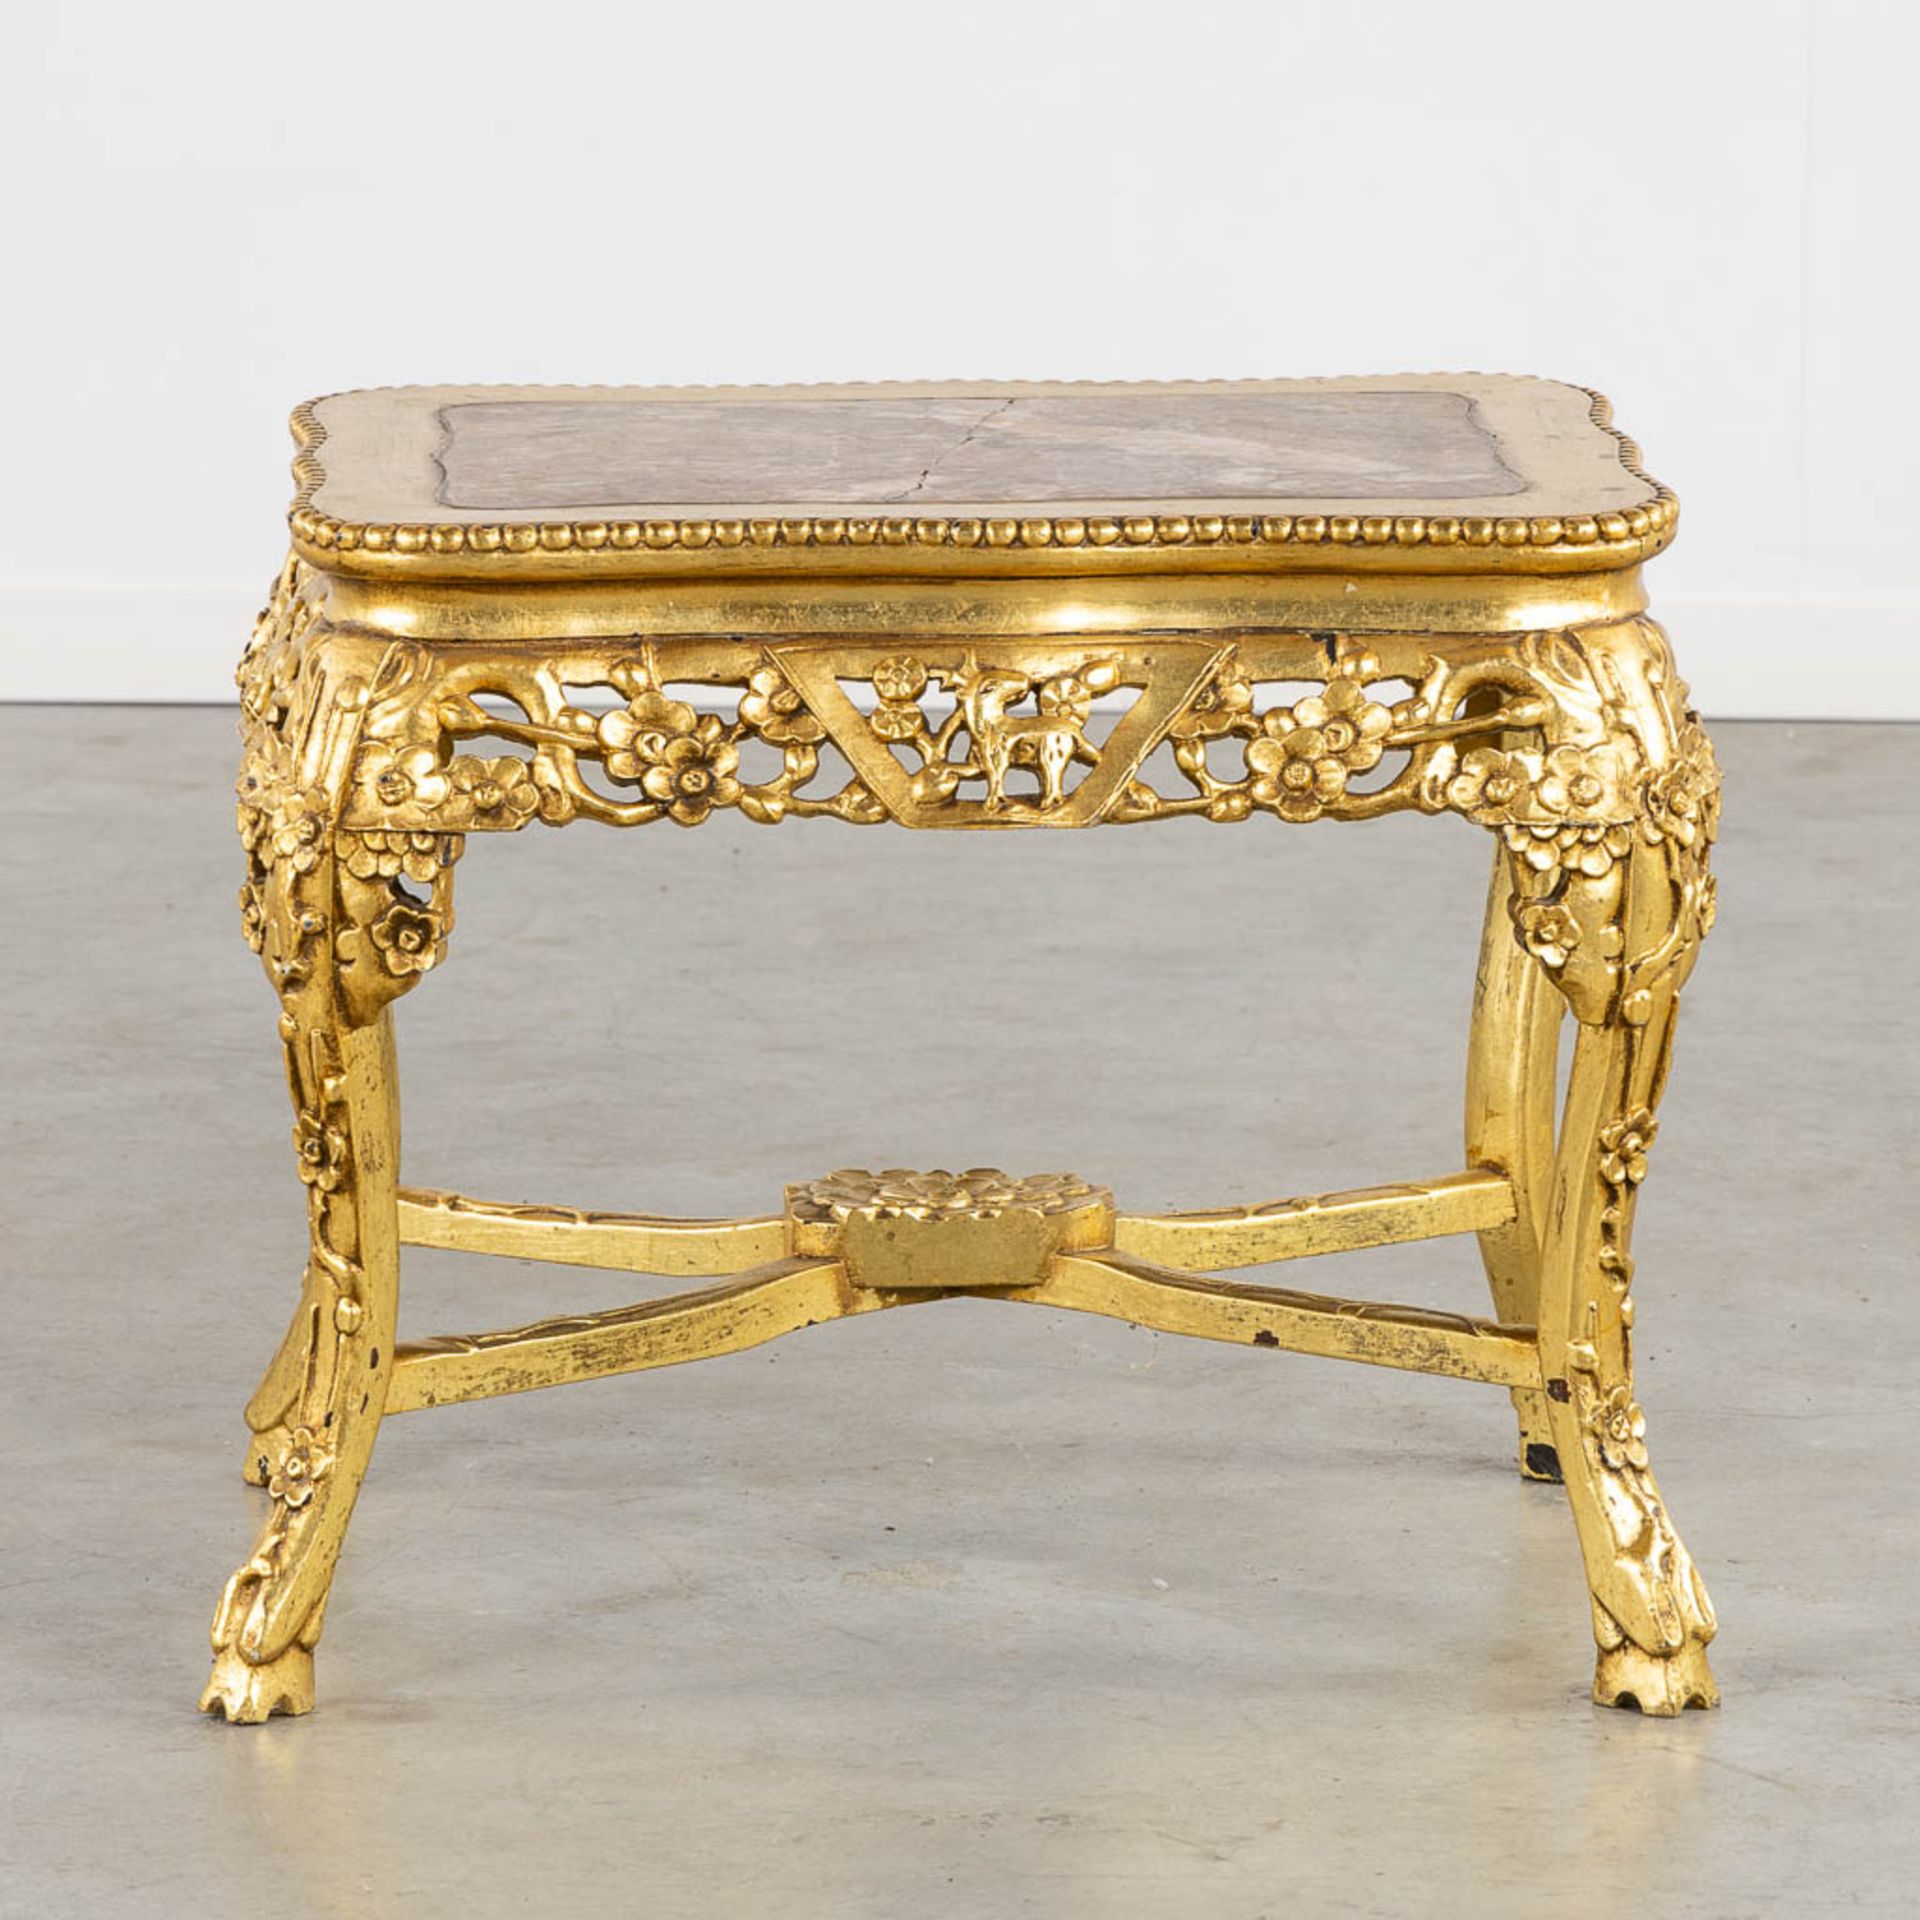 An oriental style side table, gilt wood with a marble top. (L:46 x W:52 x H:48 cm) - Bild 5 aus 12